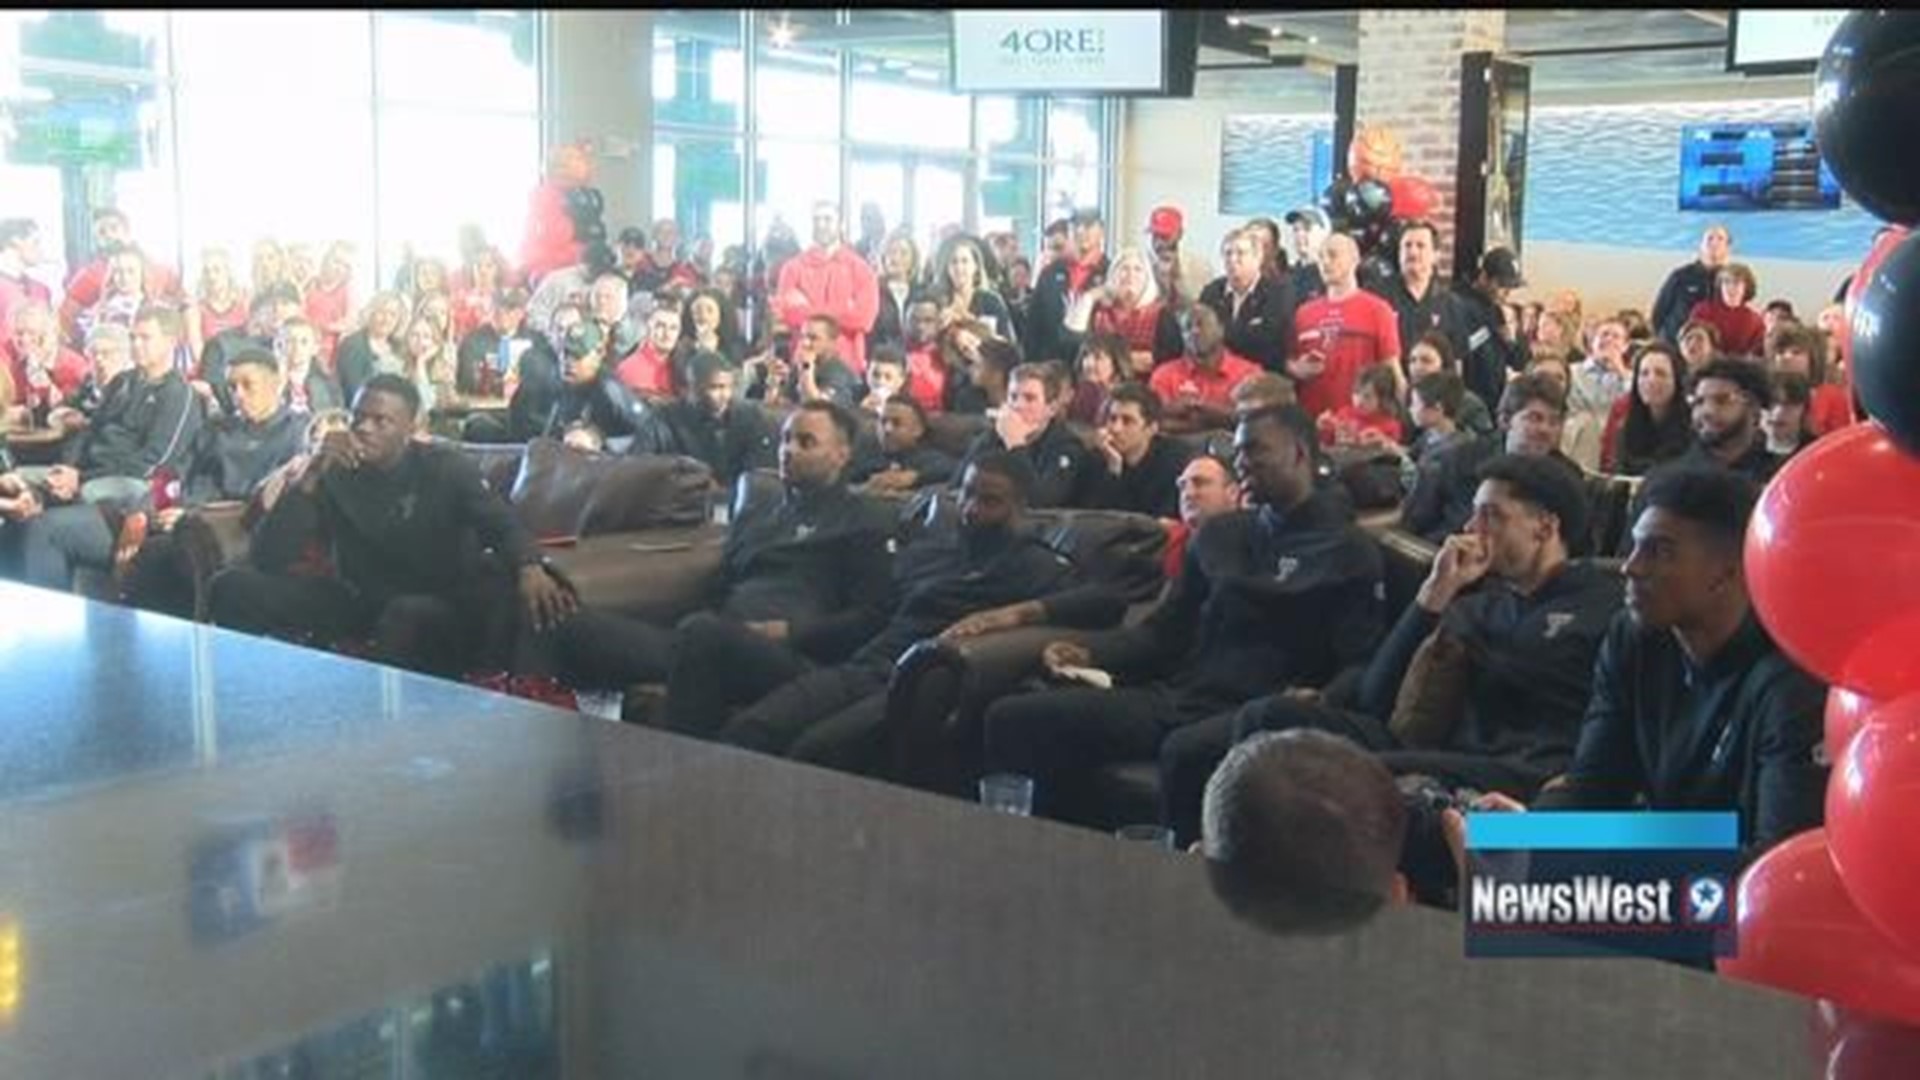 Texas Tech will play first round of NCAA Tournament in Dallas